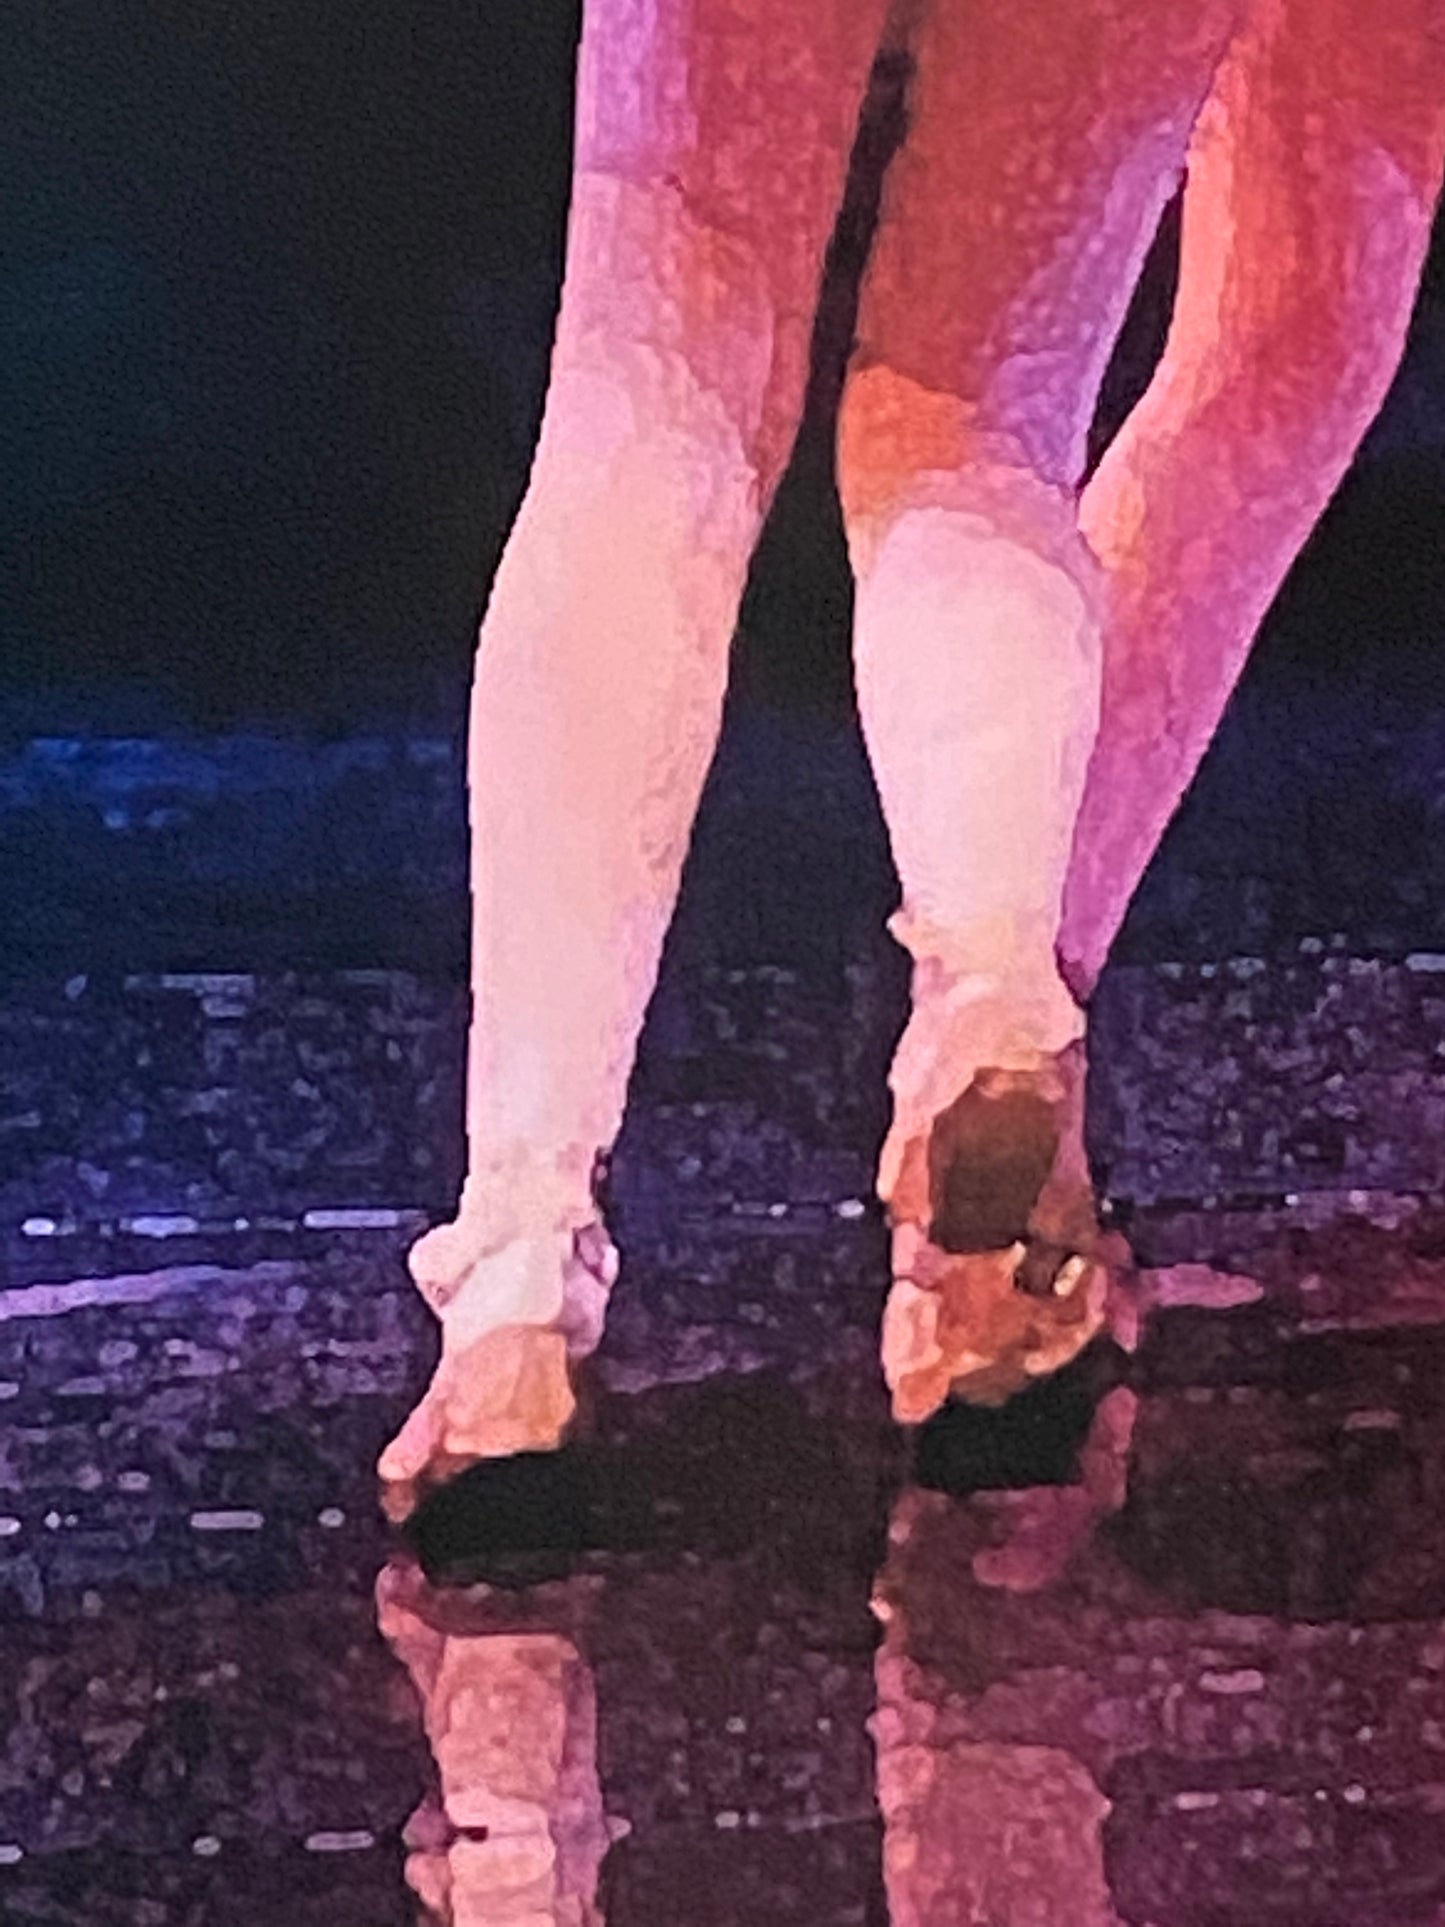 detail section showing dancer's feet and legs